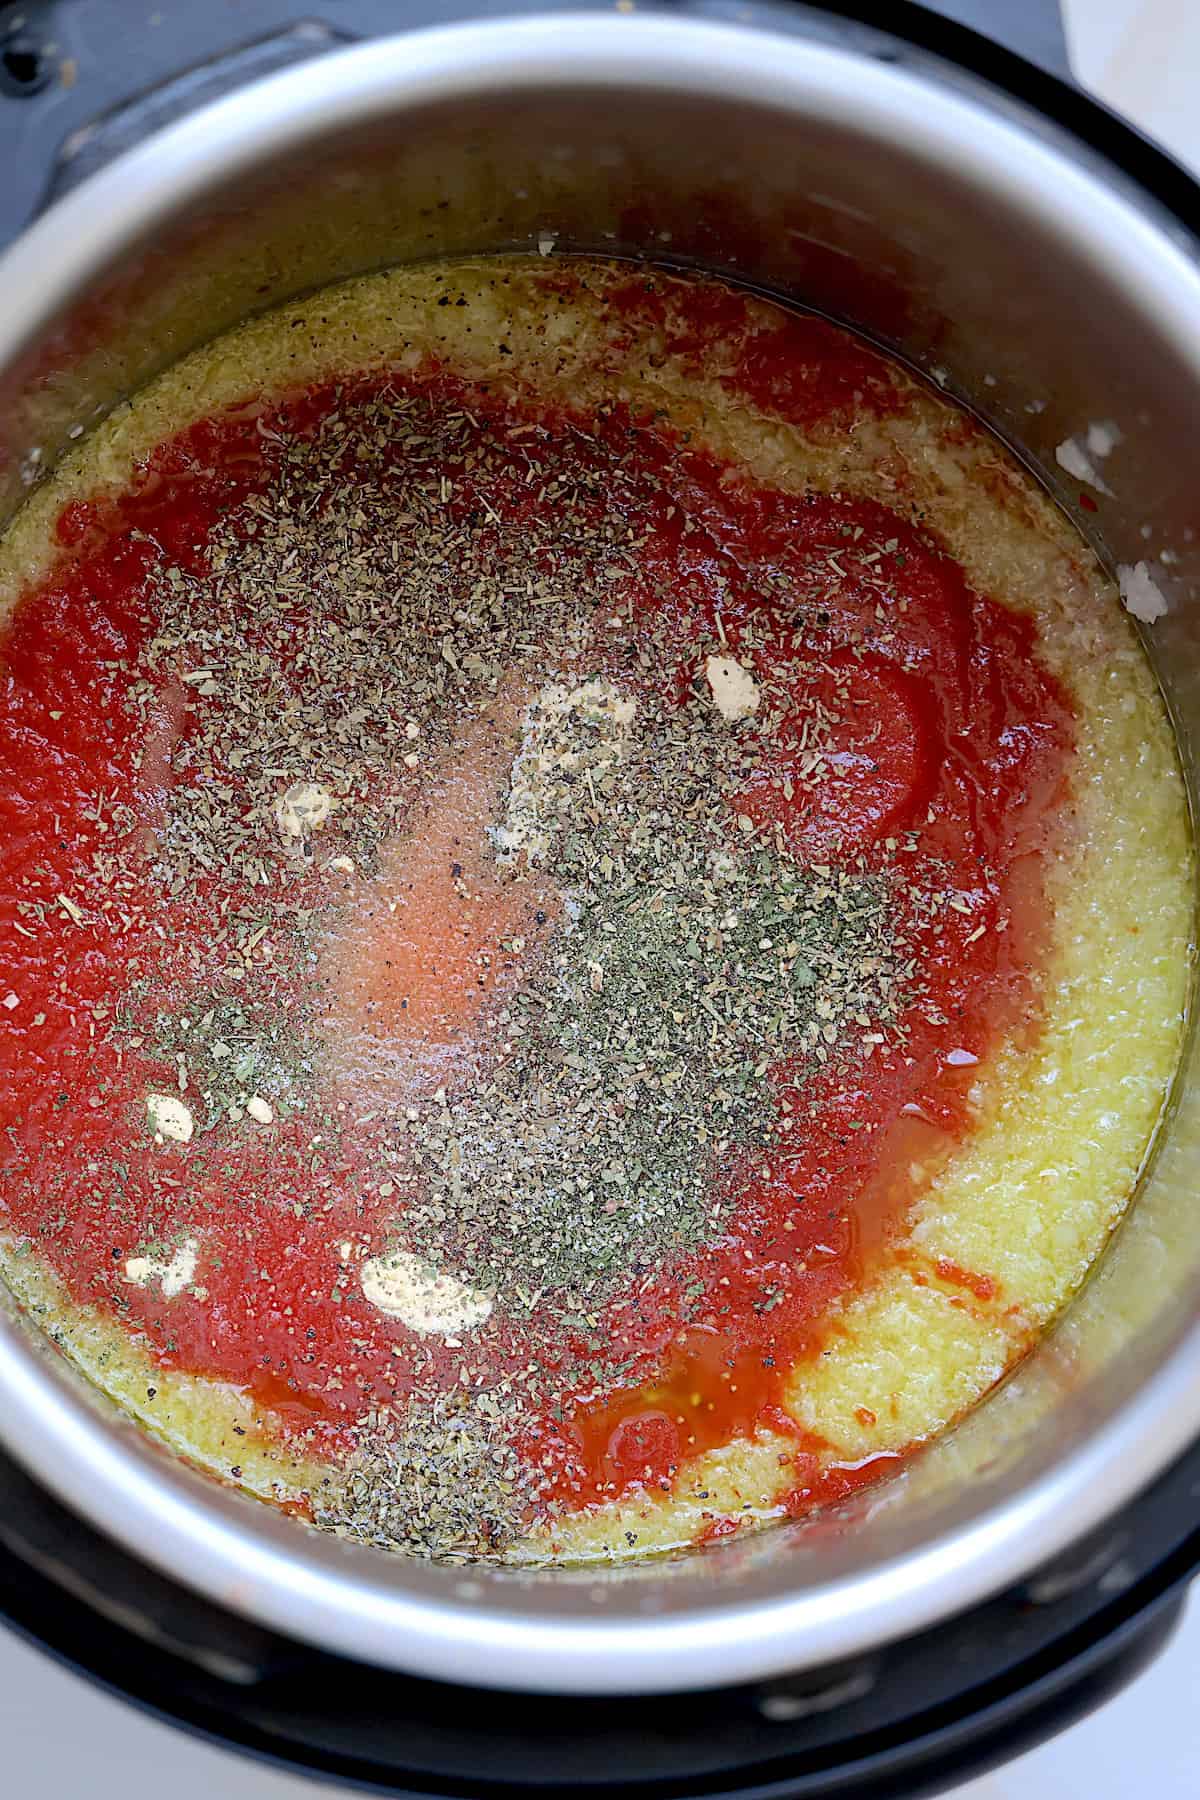 onions, garlic, tomato sauce and seasonings in an inner pot of pressure cooker